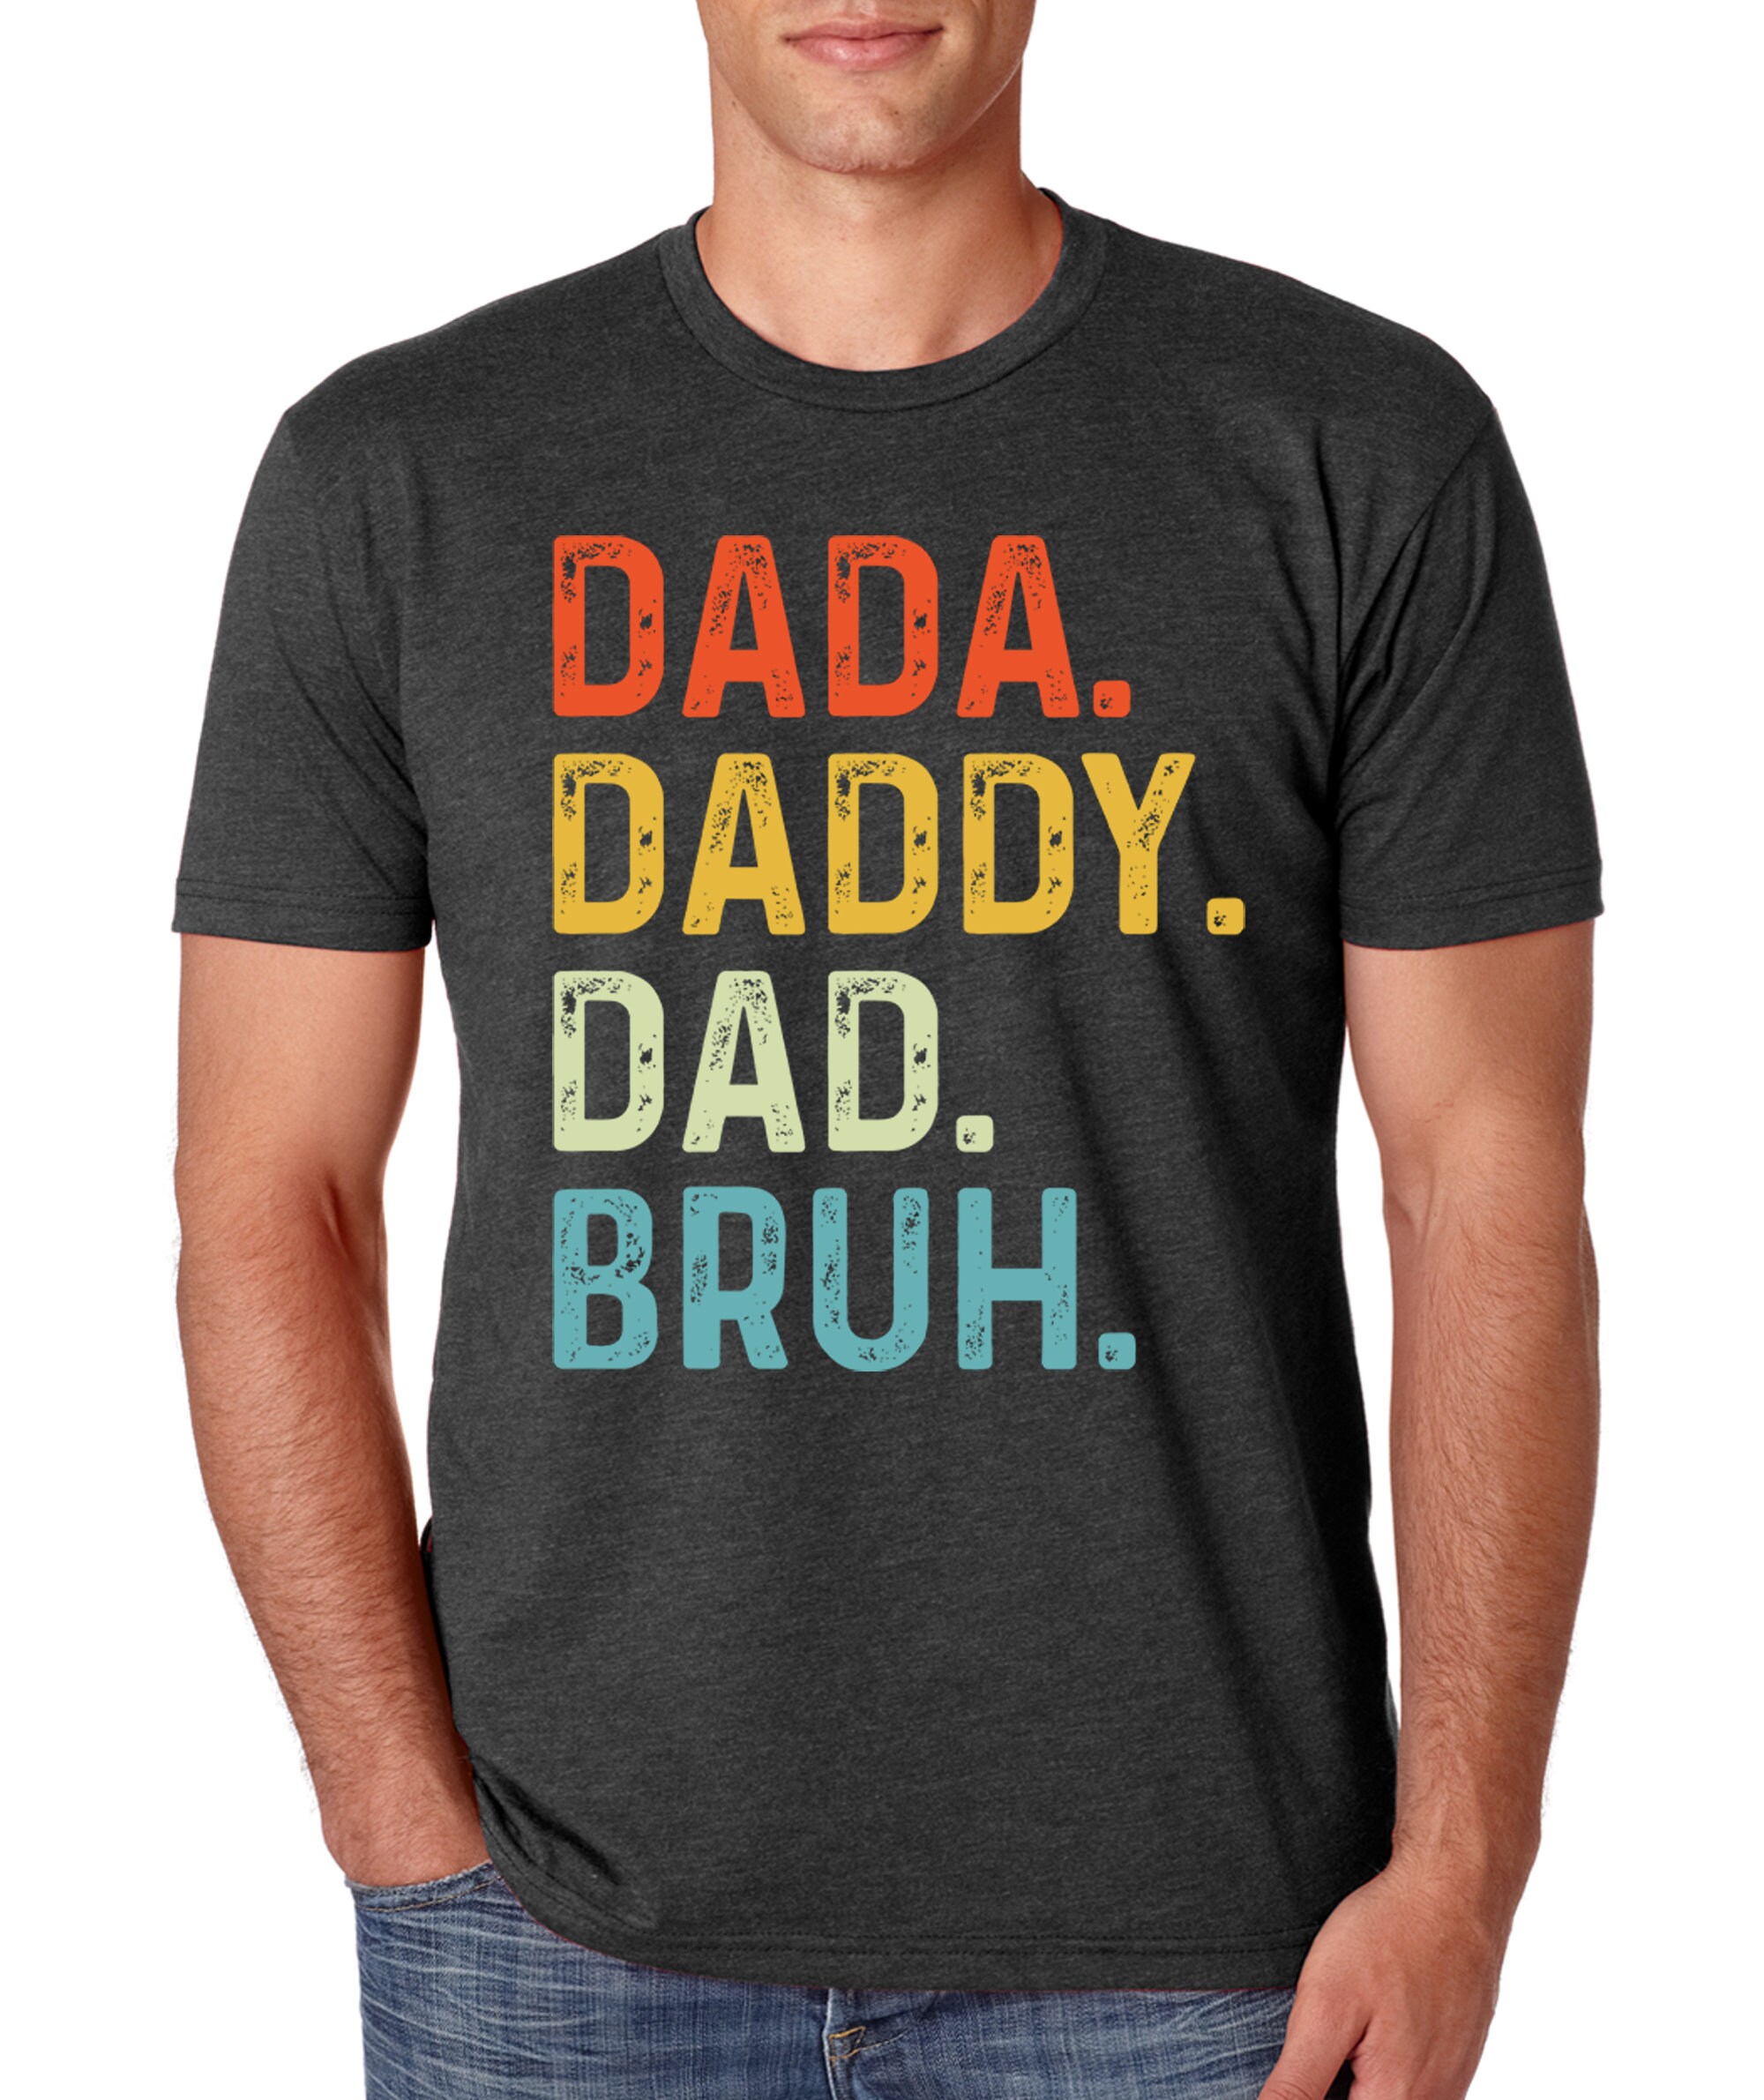 Custom Date Text Funny Gift for Father's Day Custom Men's All Over Print T-shirt Casual Short Sleeve Tee Shirts DA DA Est